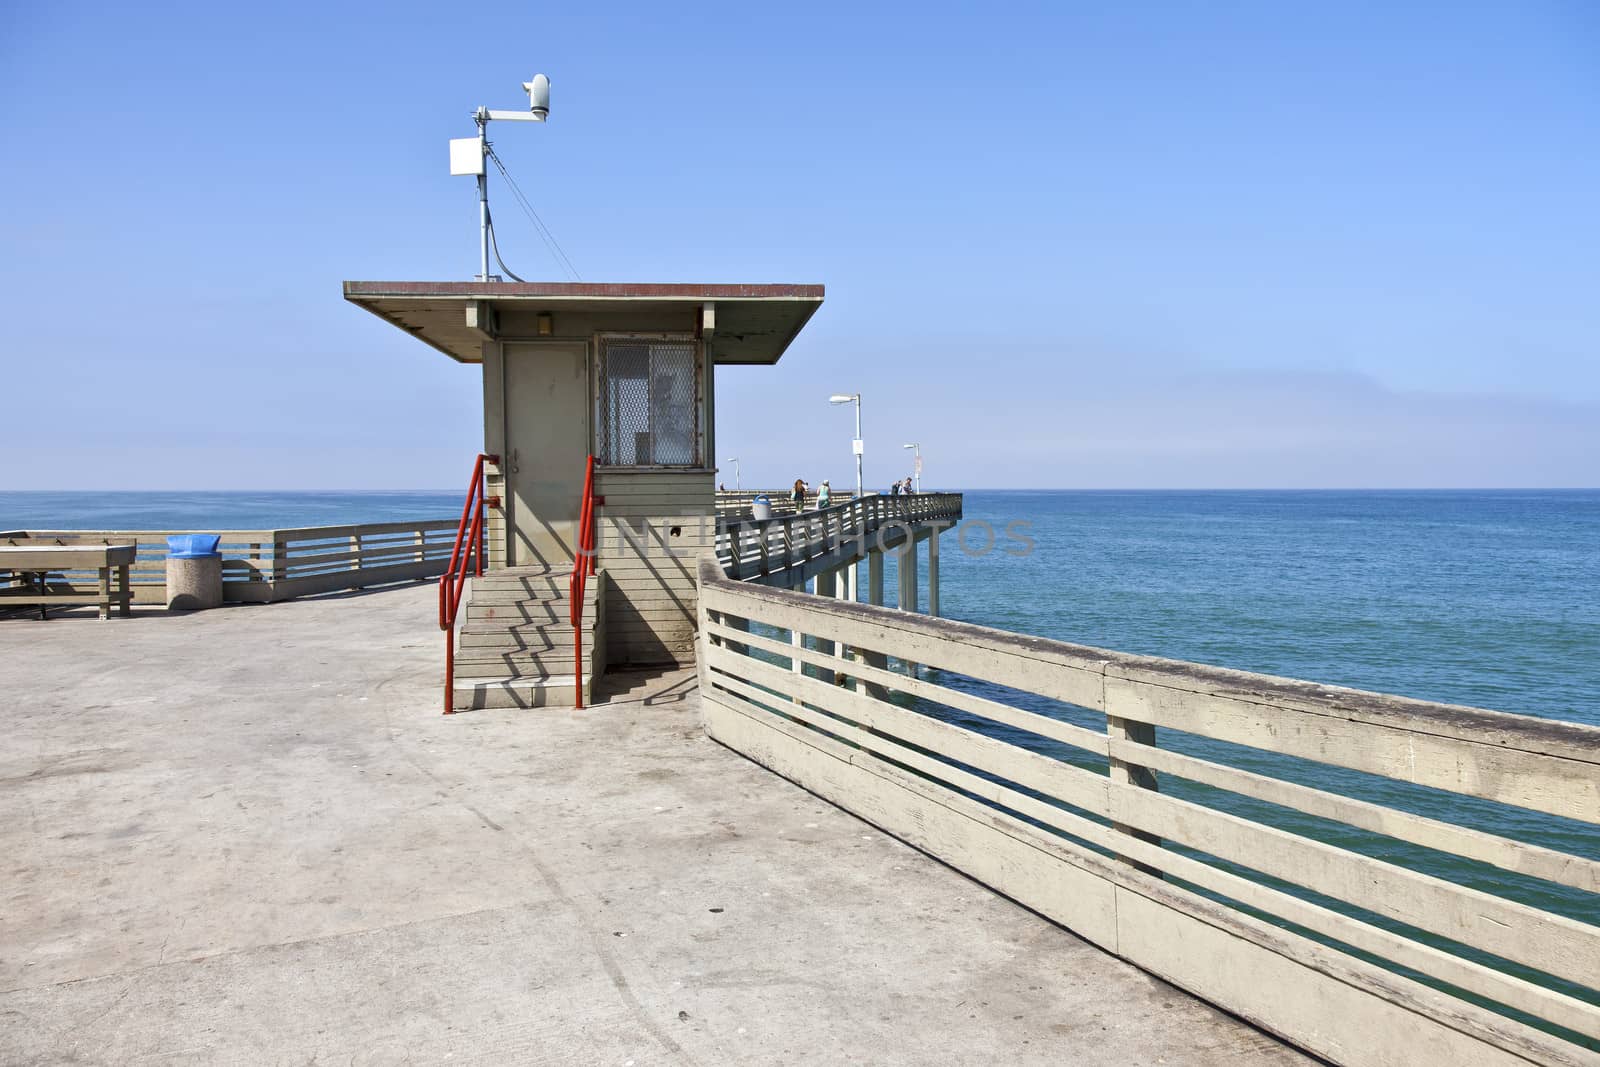 Boardwalk pier with an ocean view in Point Loma California.